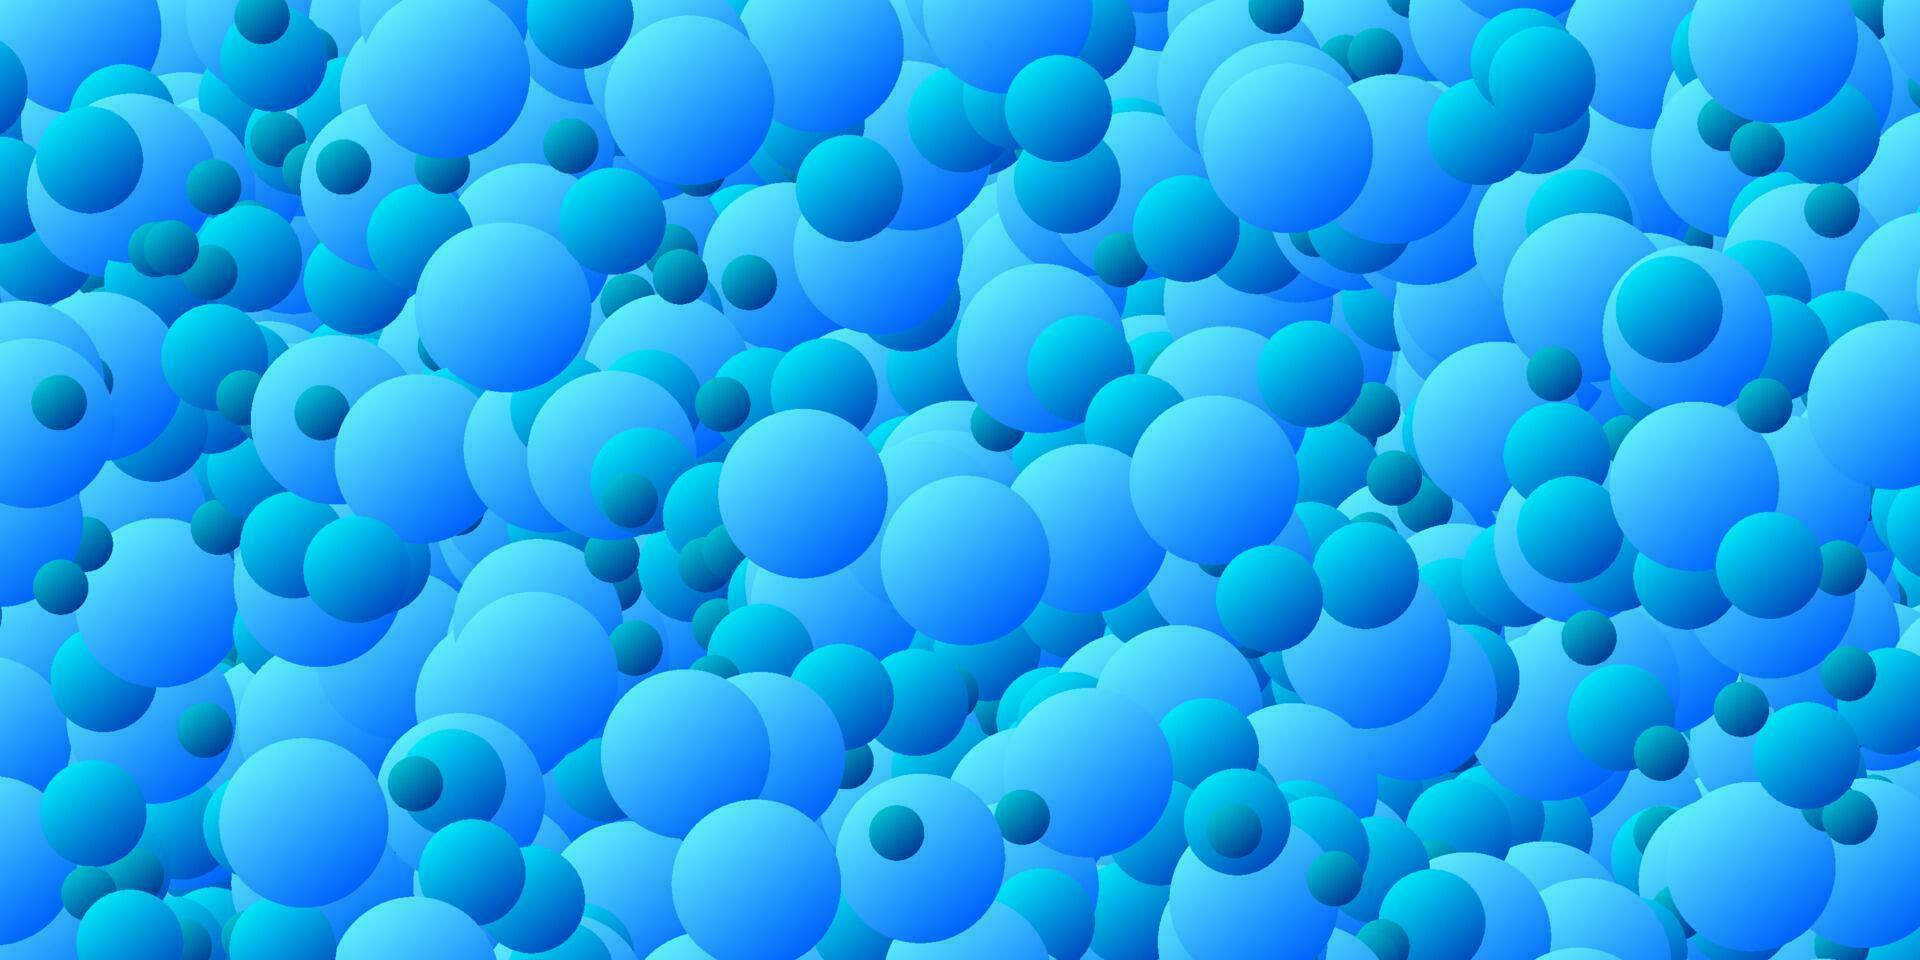 Blue circles on a blue background vector